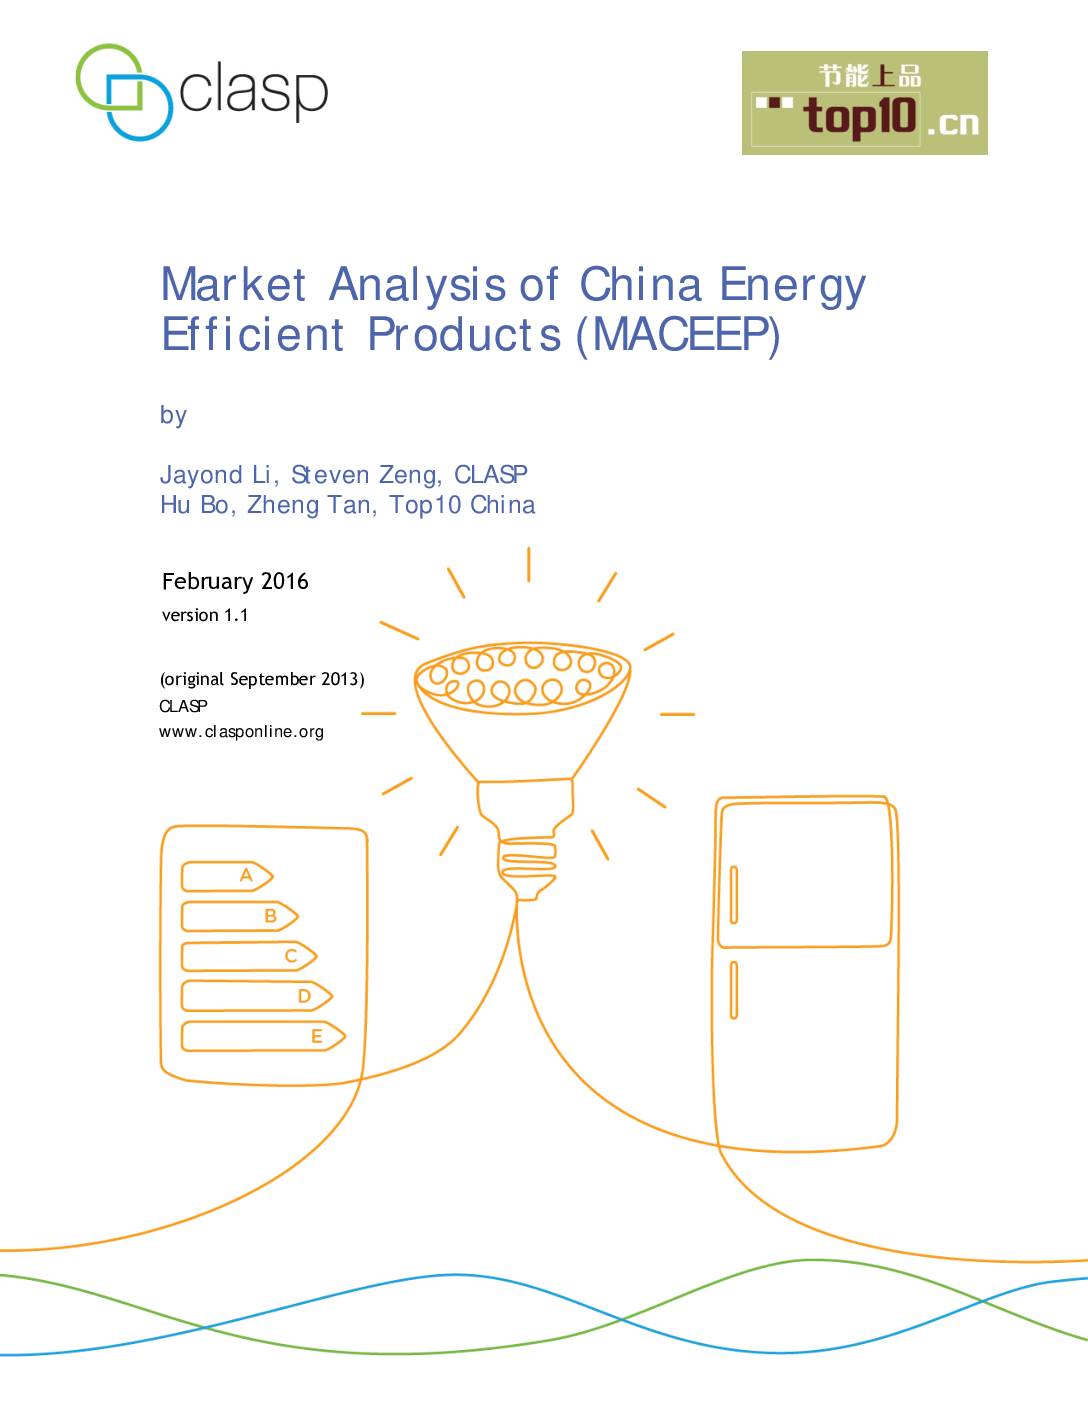 Market Analysis of China Energy Efficient Products (MACEEP) (version 1.1)